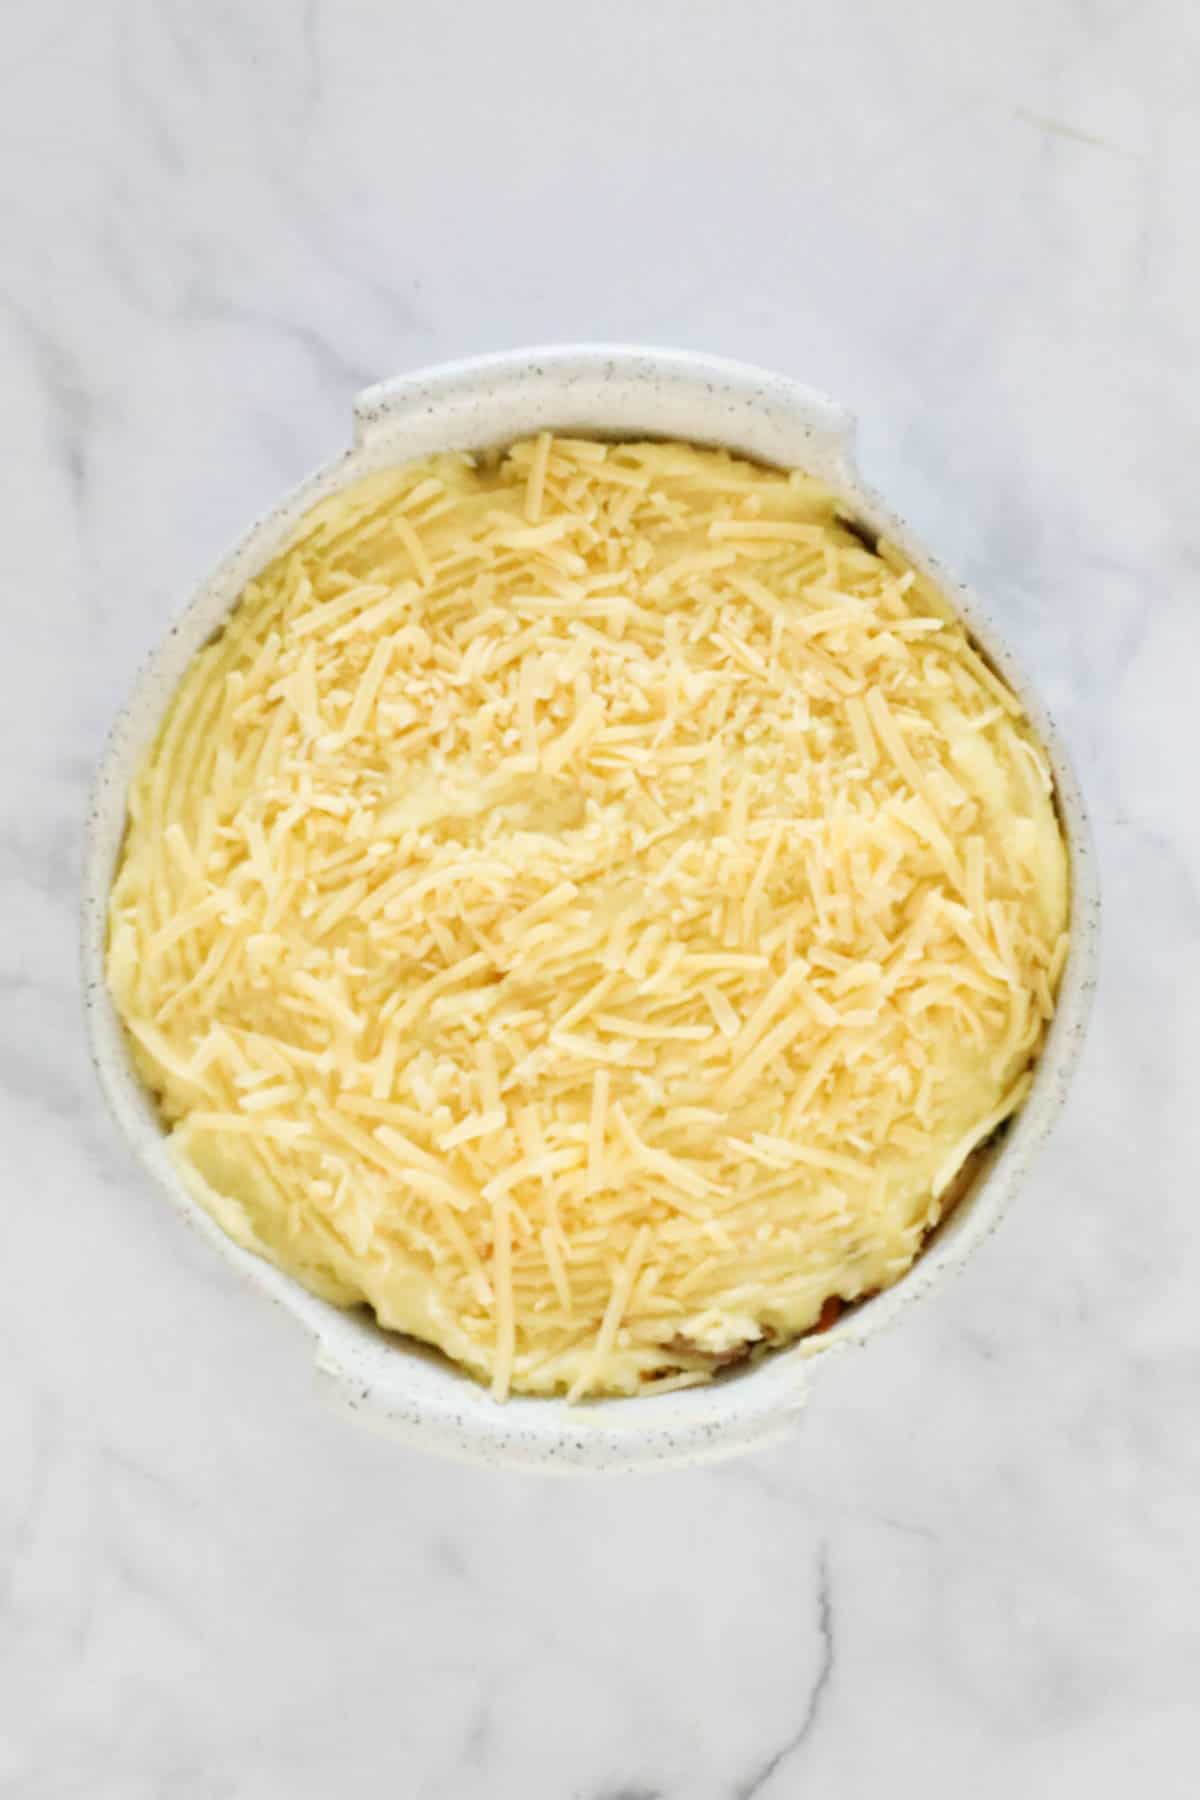 Mashed potato and grated cheese in a round baking dish.